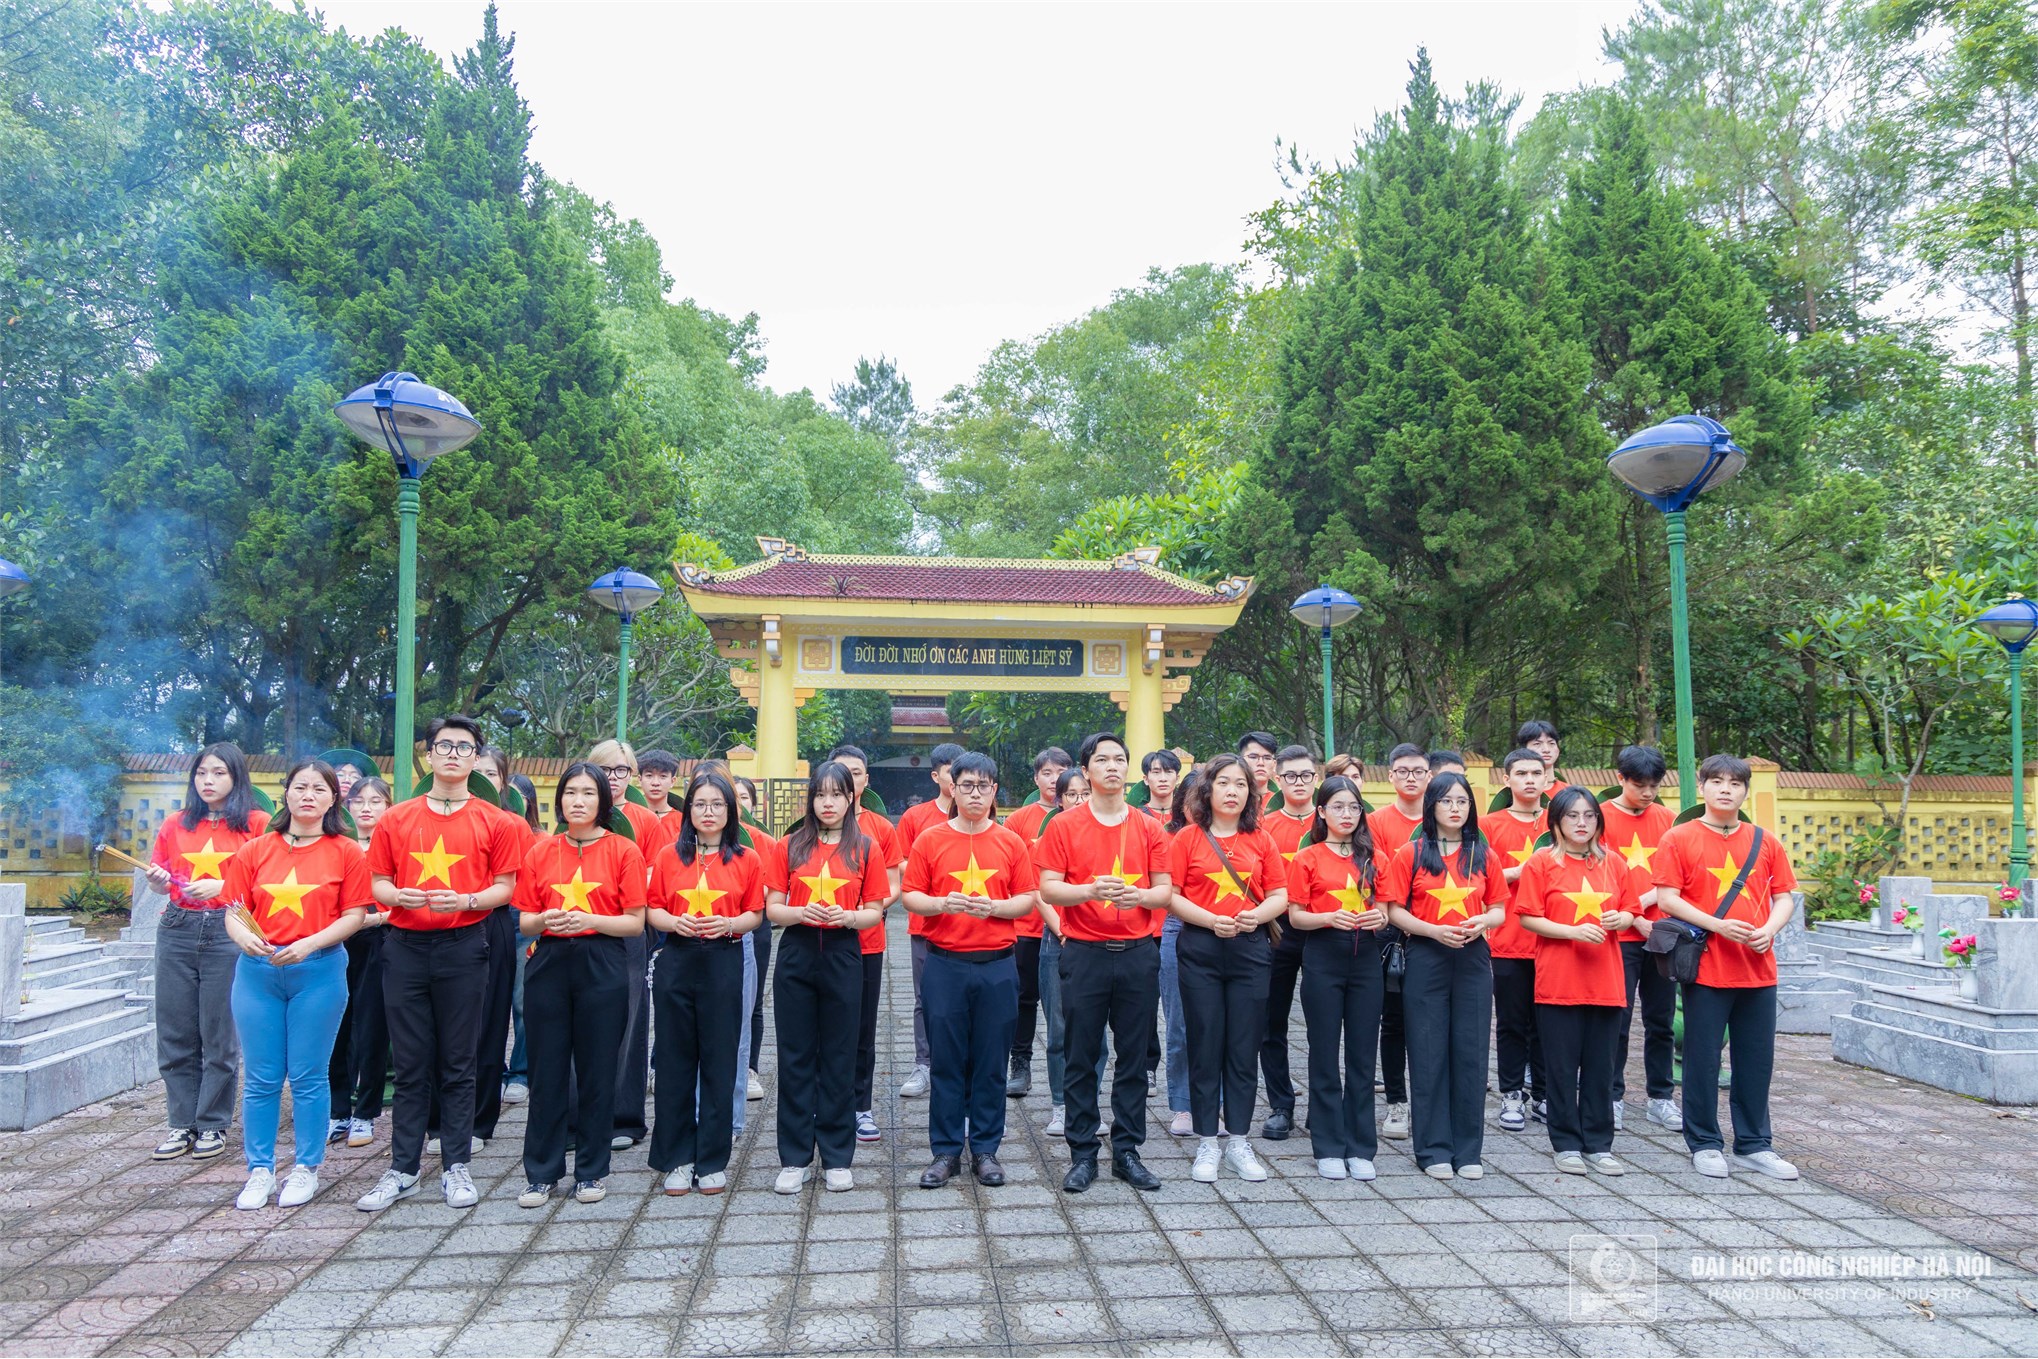 The Journey of Advanced HaUI Youth Following President Ho Chi Minh’s Will